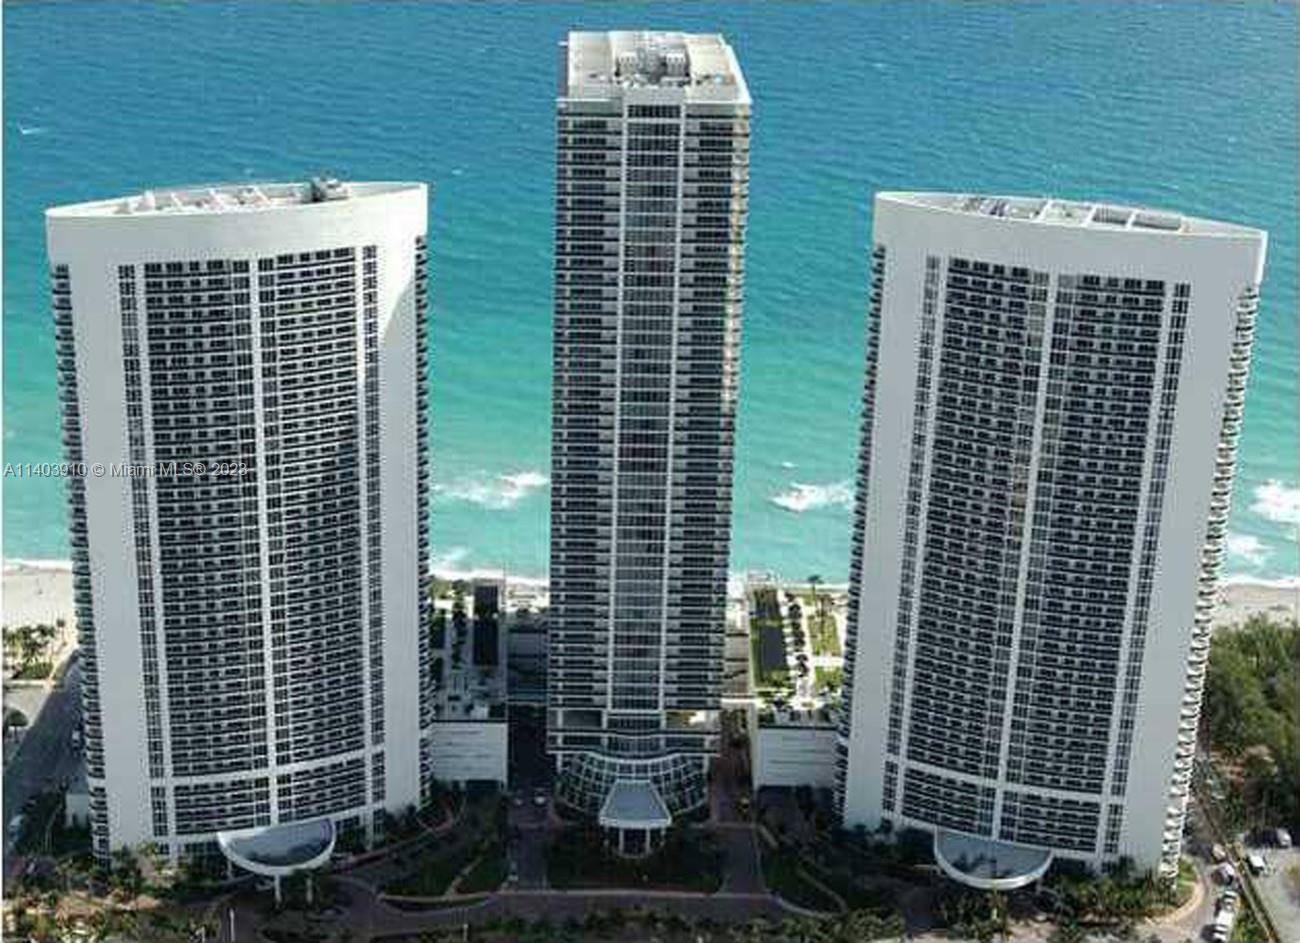 Unbelievable ocean and intercoastal view from 41 floor balconies of this luxurious 2 bedroom furnished apartment.